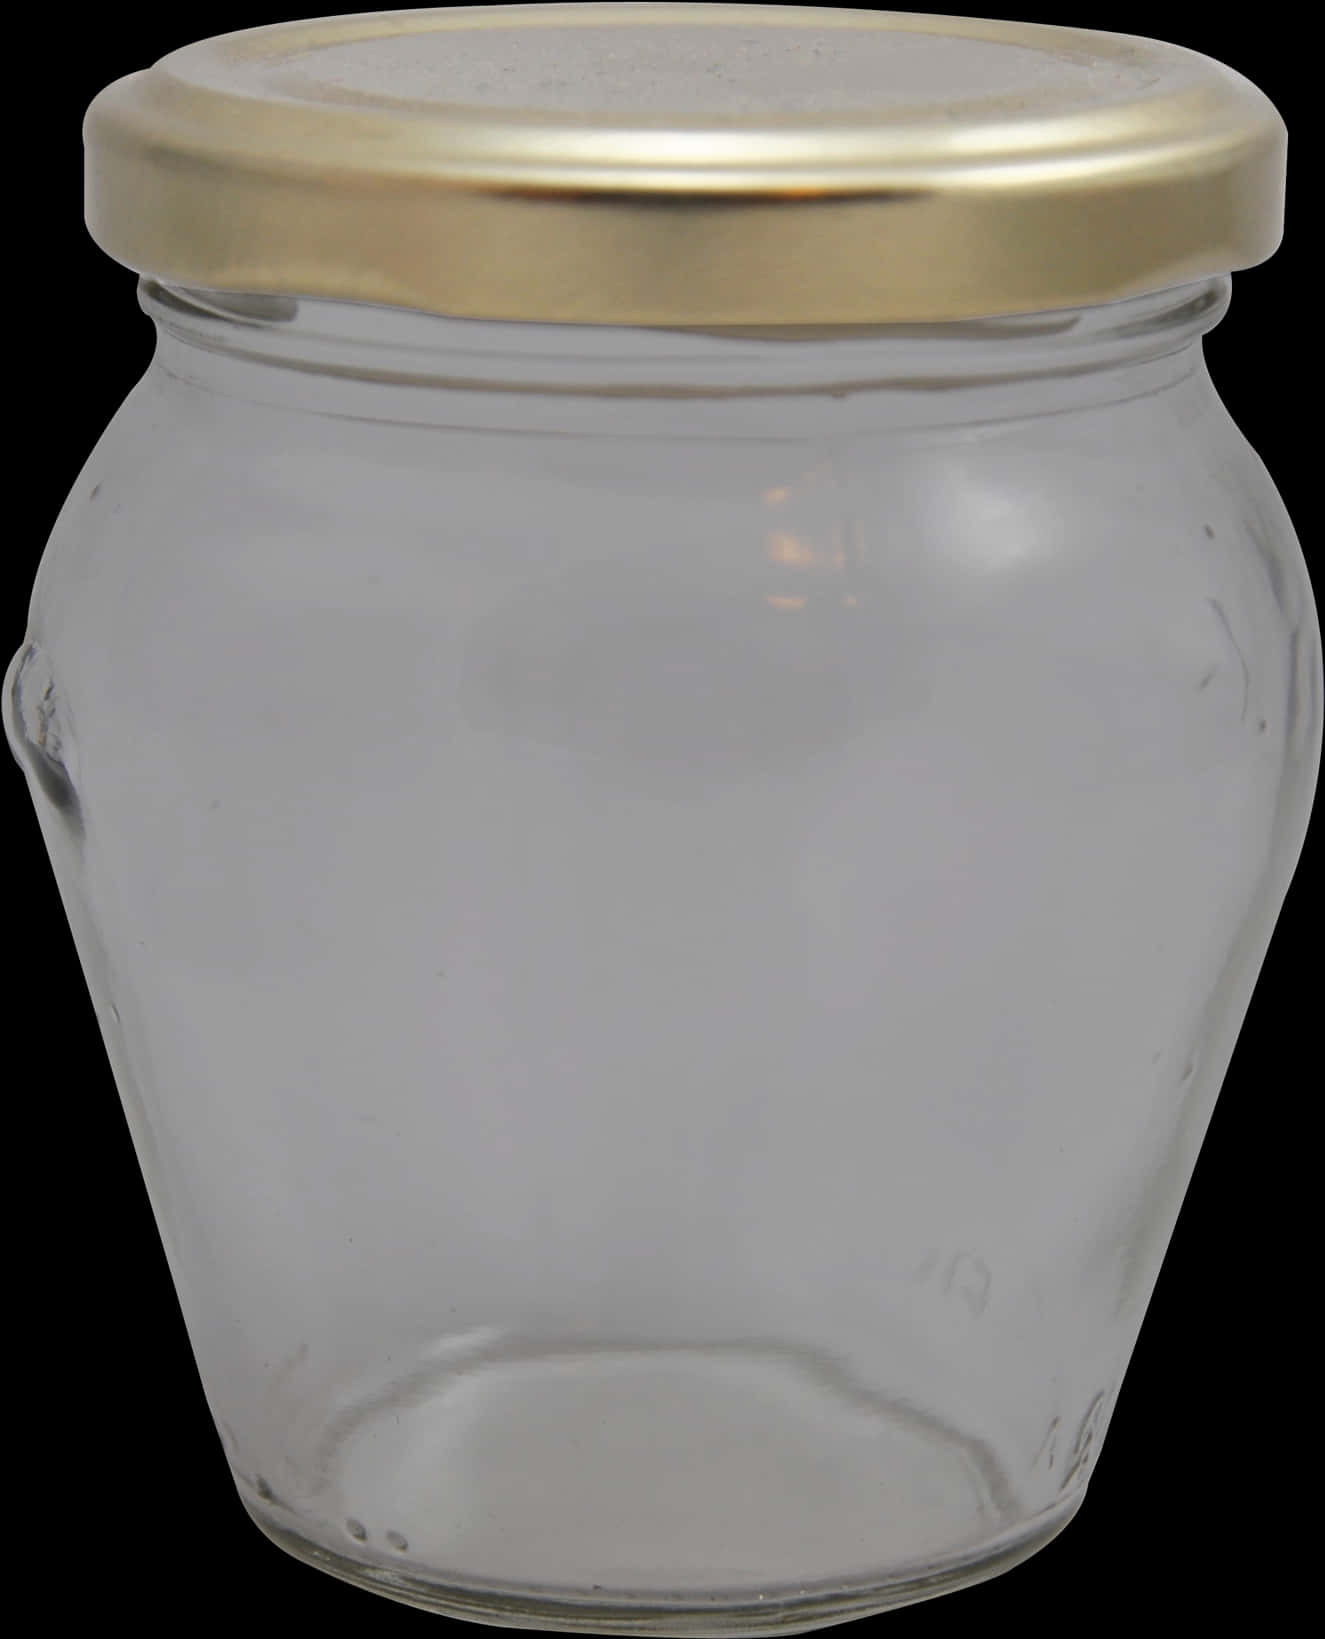 A Glass Jar With A Gold Lid